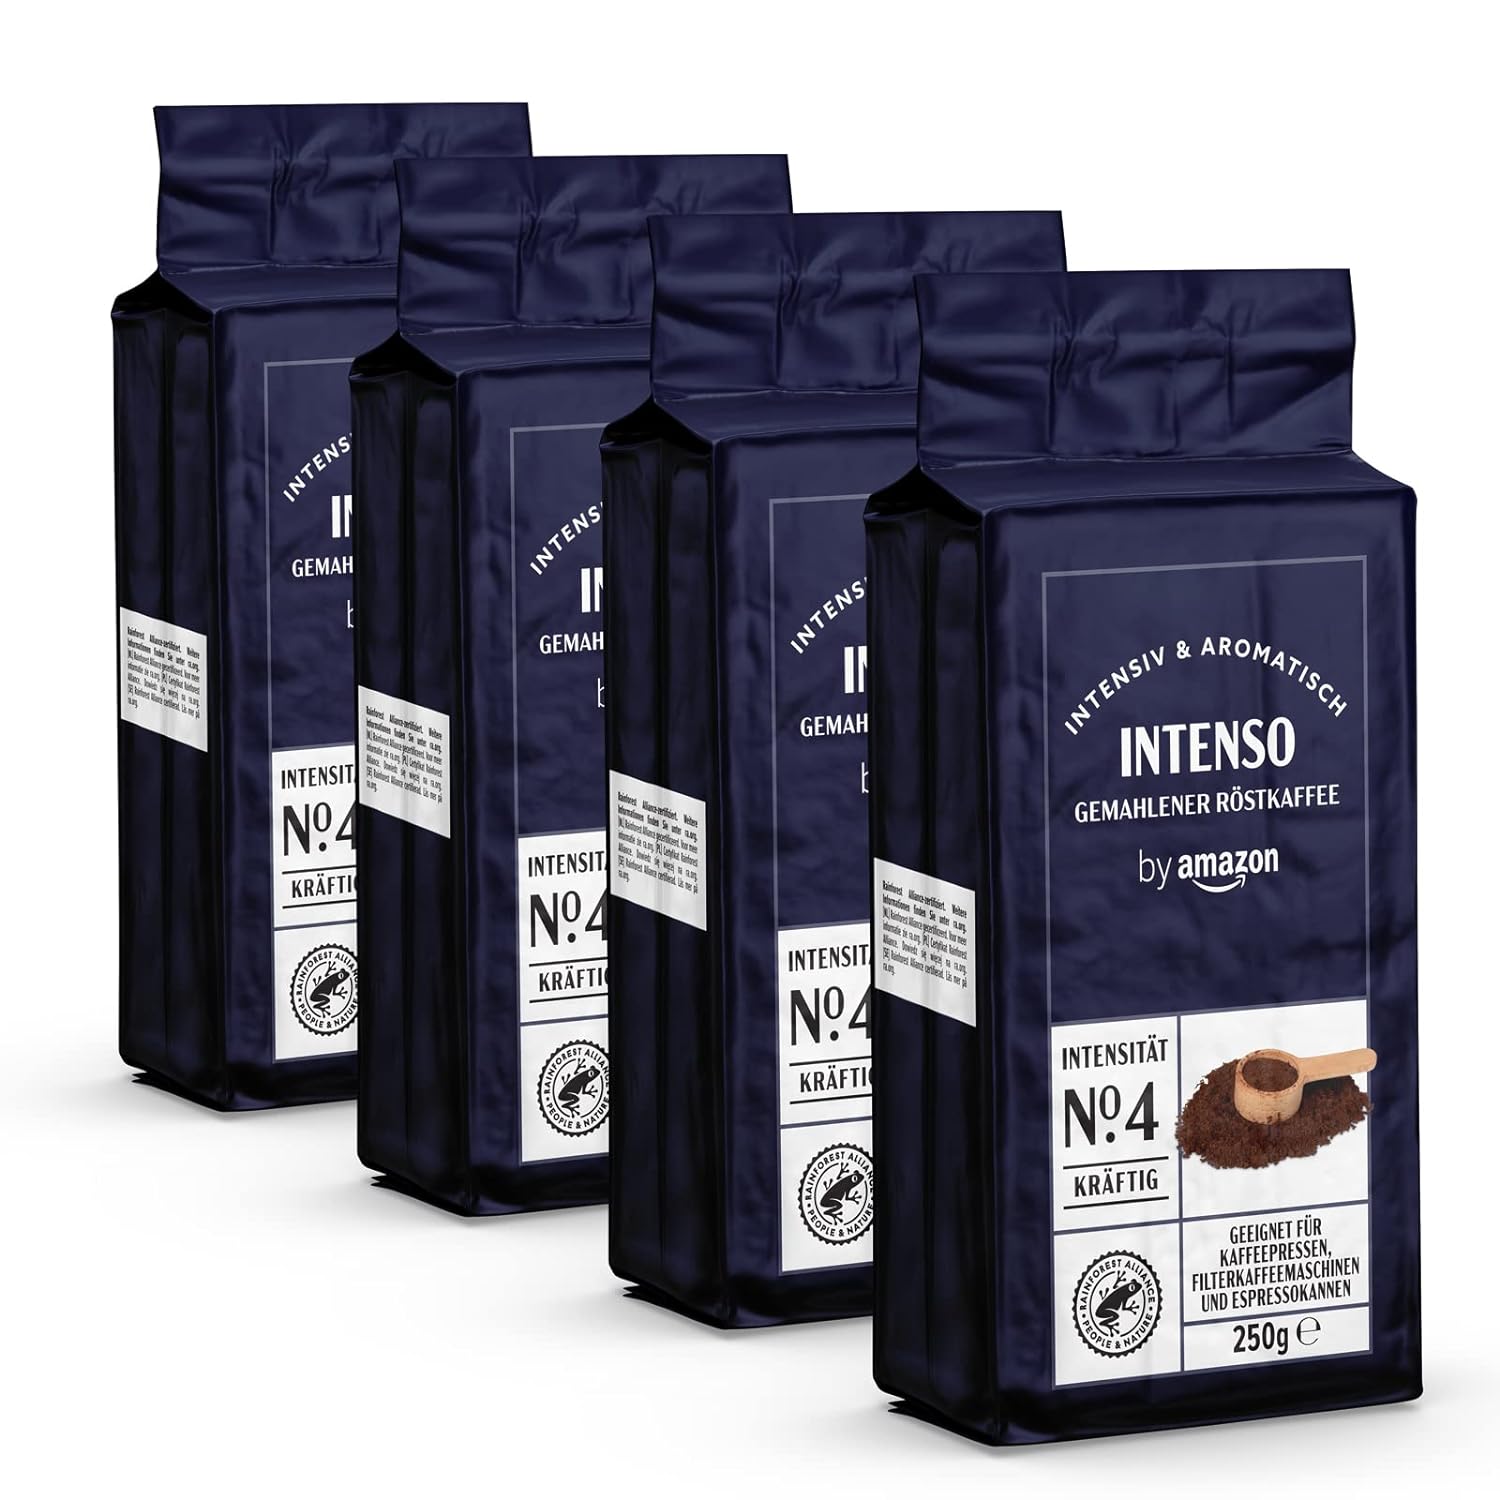 by Amazon Caffè Intenso Ground Coffee 1kg - 4 Packs of 250g - Rainforest Alliance Certification